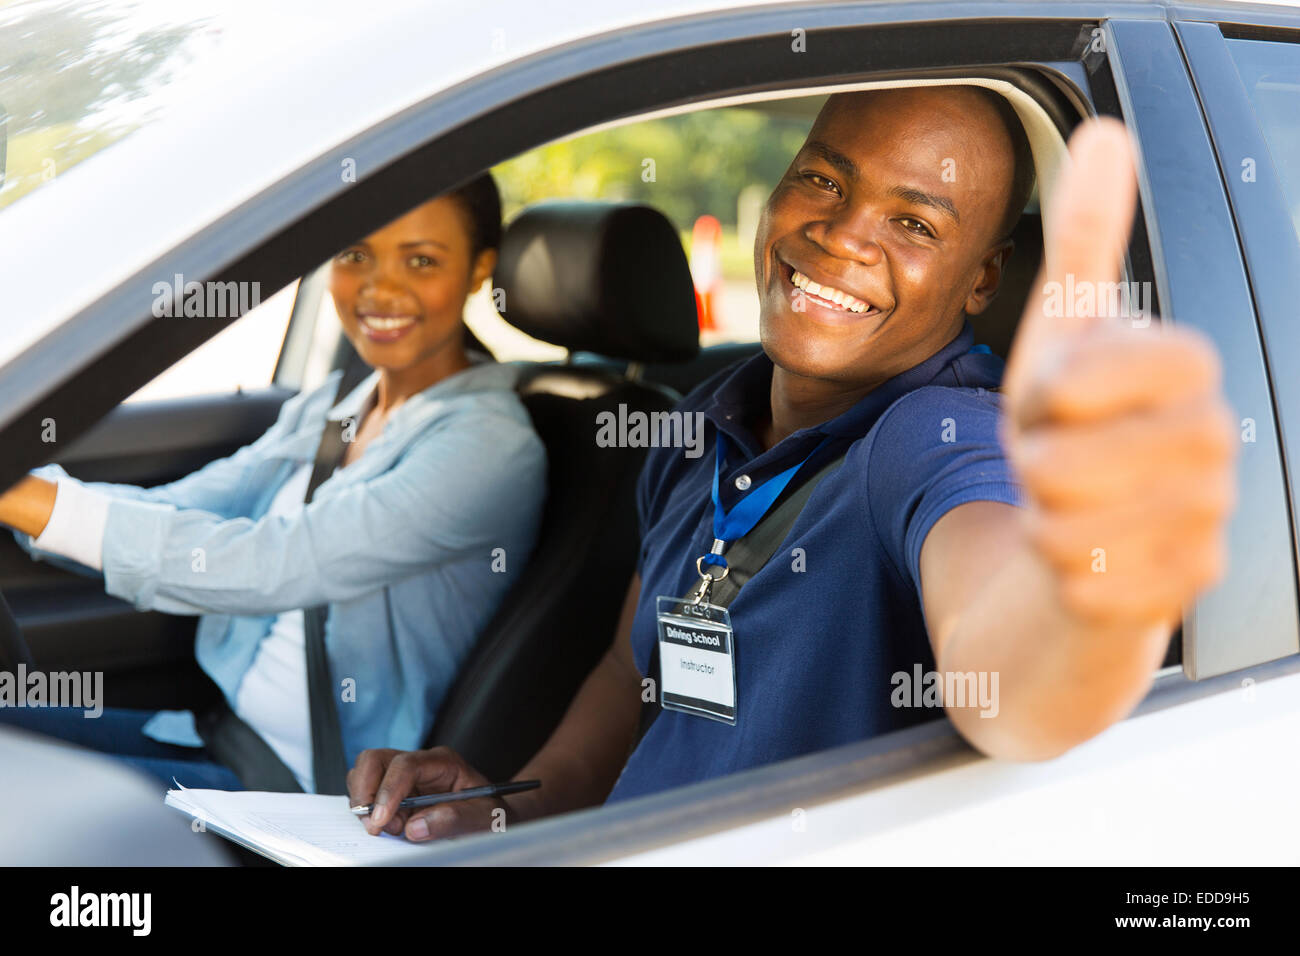 happy male African driving instructor in a car with learner driver giving thumb up Stock Photo